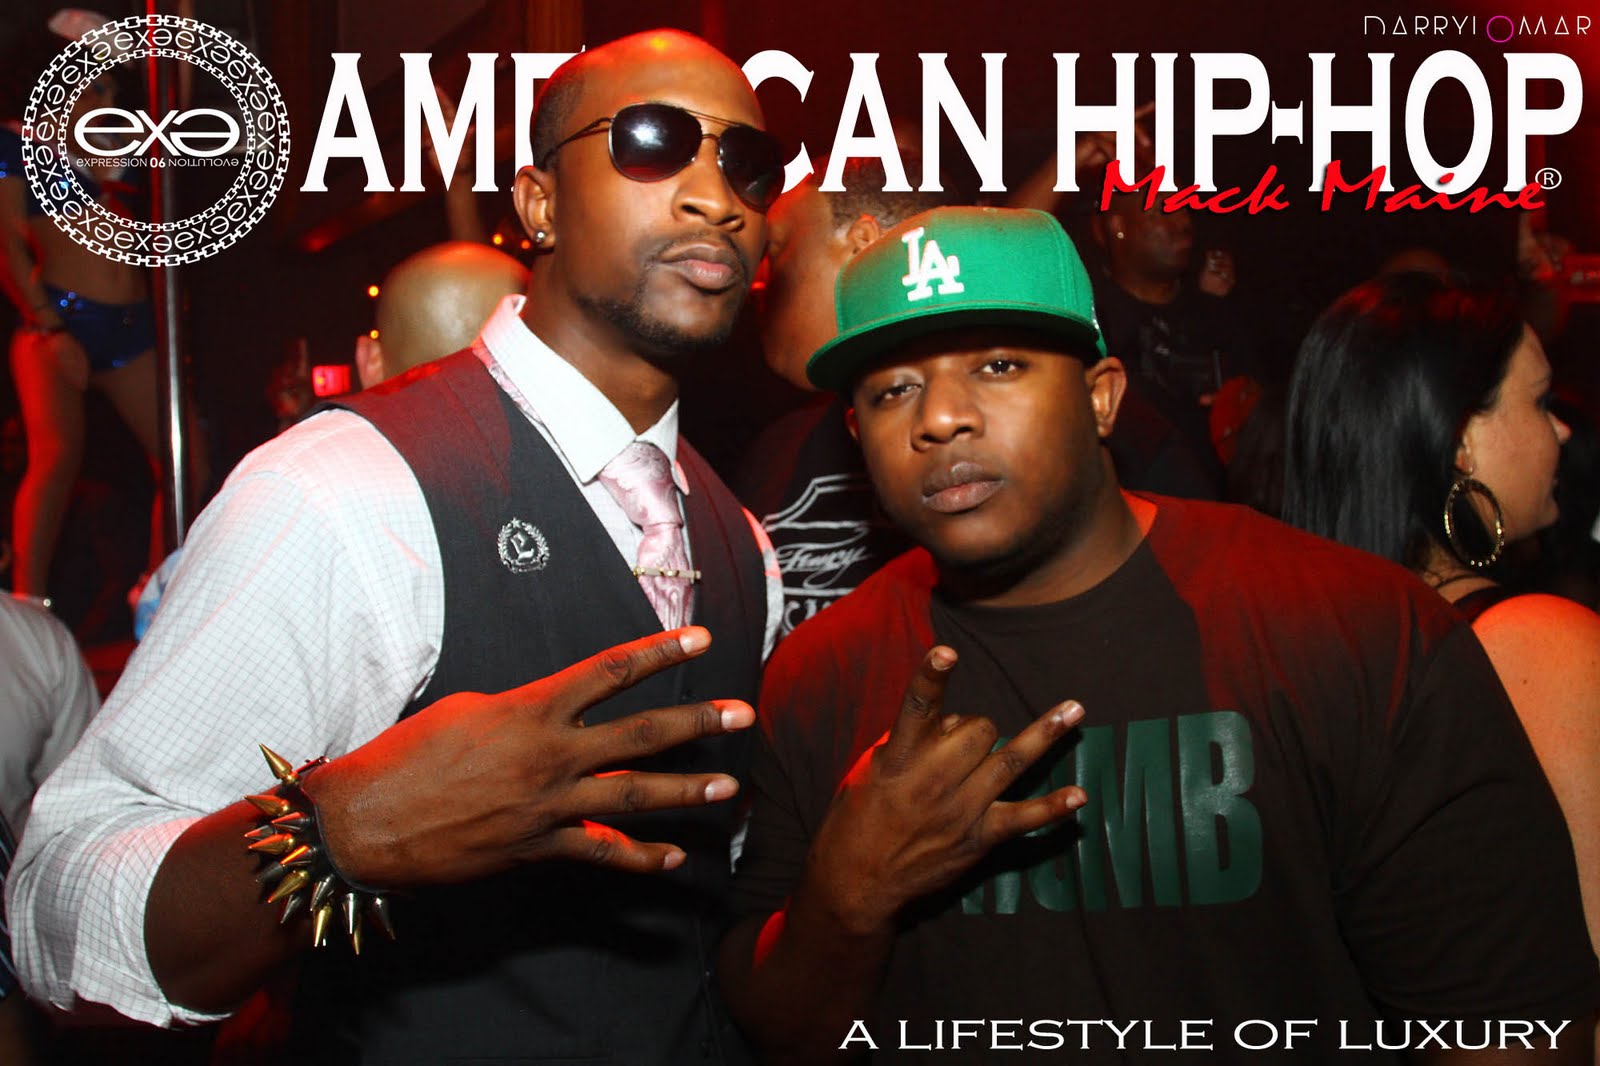 LIVING THA AMERICAN DREAM: THE CEO OF EXPRESSIVE CLOTHING MEETS THE PRESIDENT OF CASH ...1600 x 1066